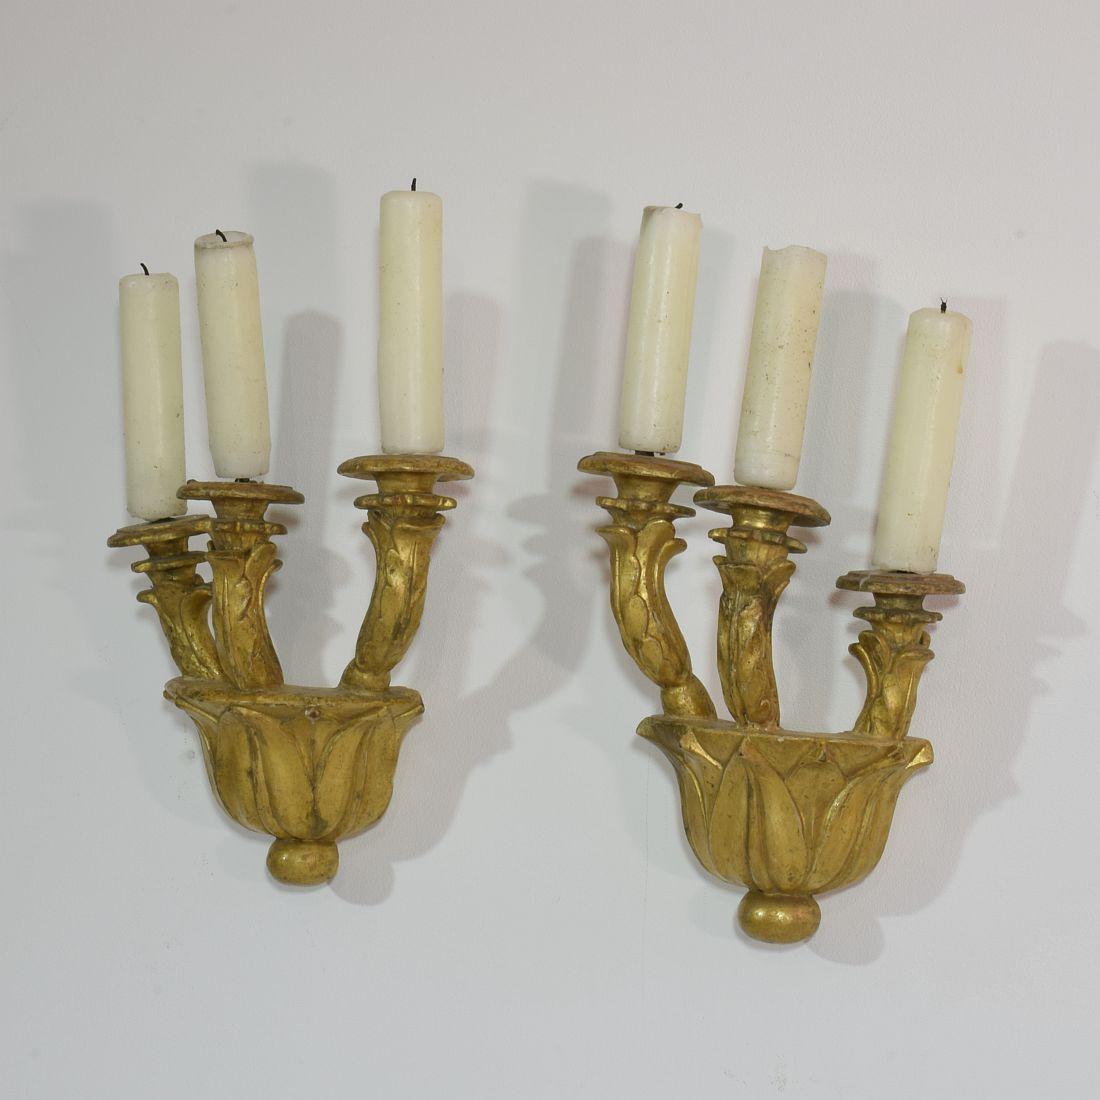 Wood Couple of Italian 18th Century Giltwood Baroque Candleholders or Sconces